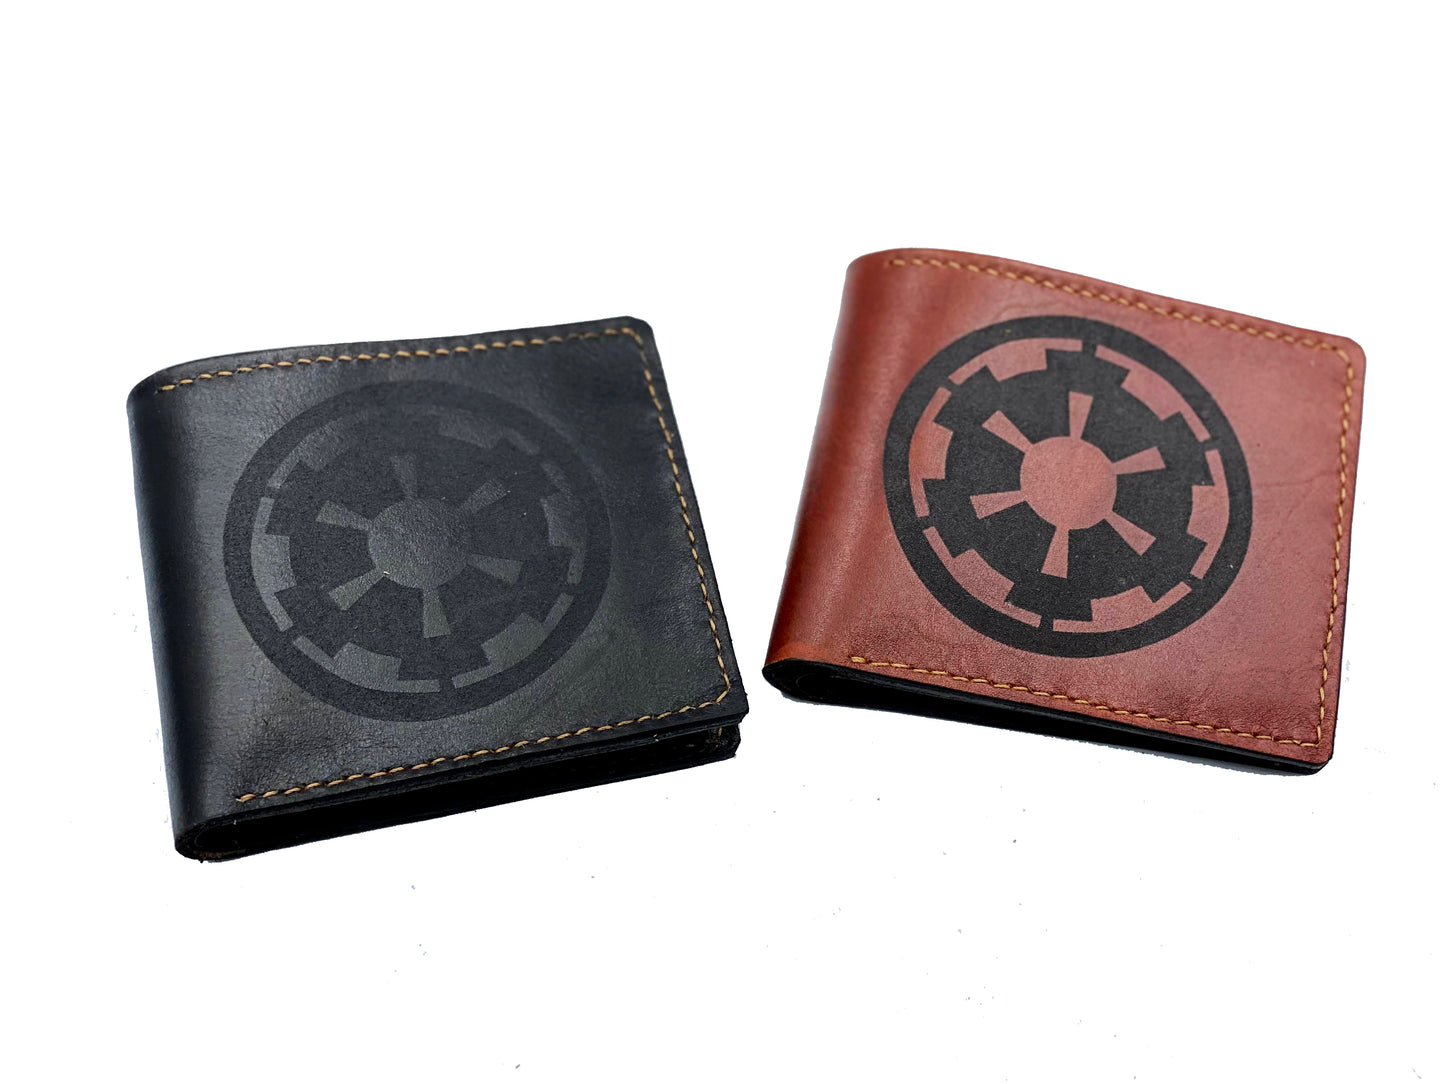 Mayan Corner - Starwars Imperial Crest logo custom leather handmade men's wallet, unique present for men, anniversary gifts for husband, boyfriend, father, brother